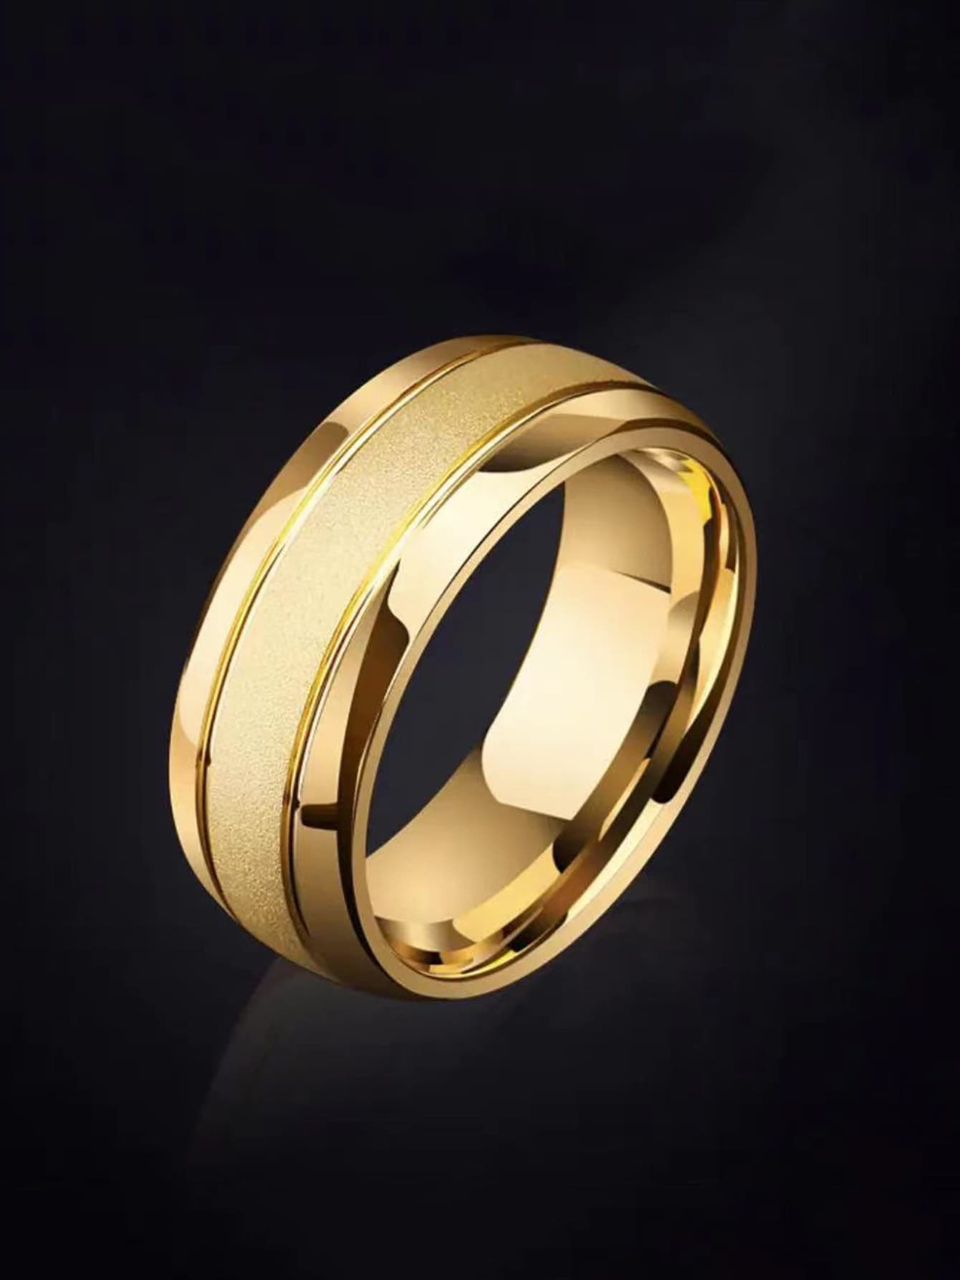 Gold Plated Patterned Men's Gift Wedding Band Ring